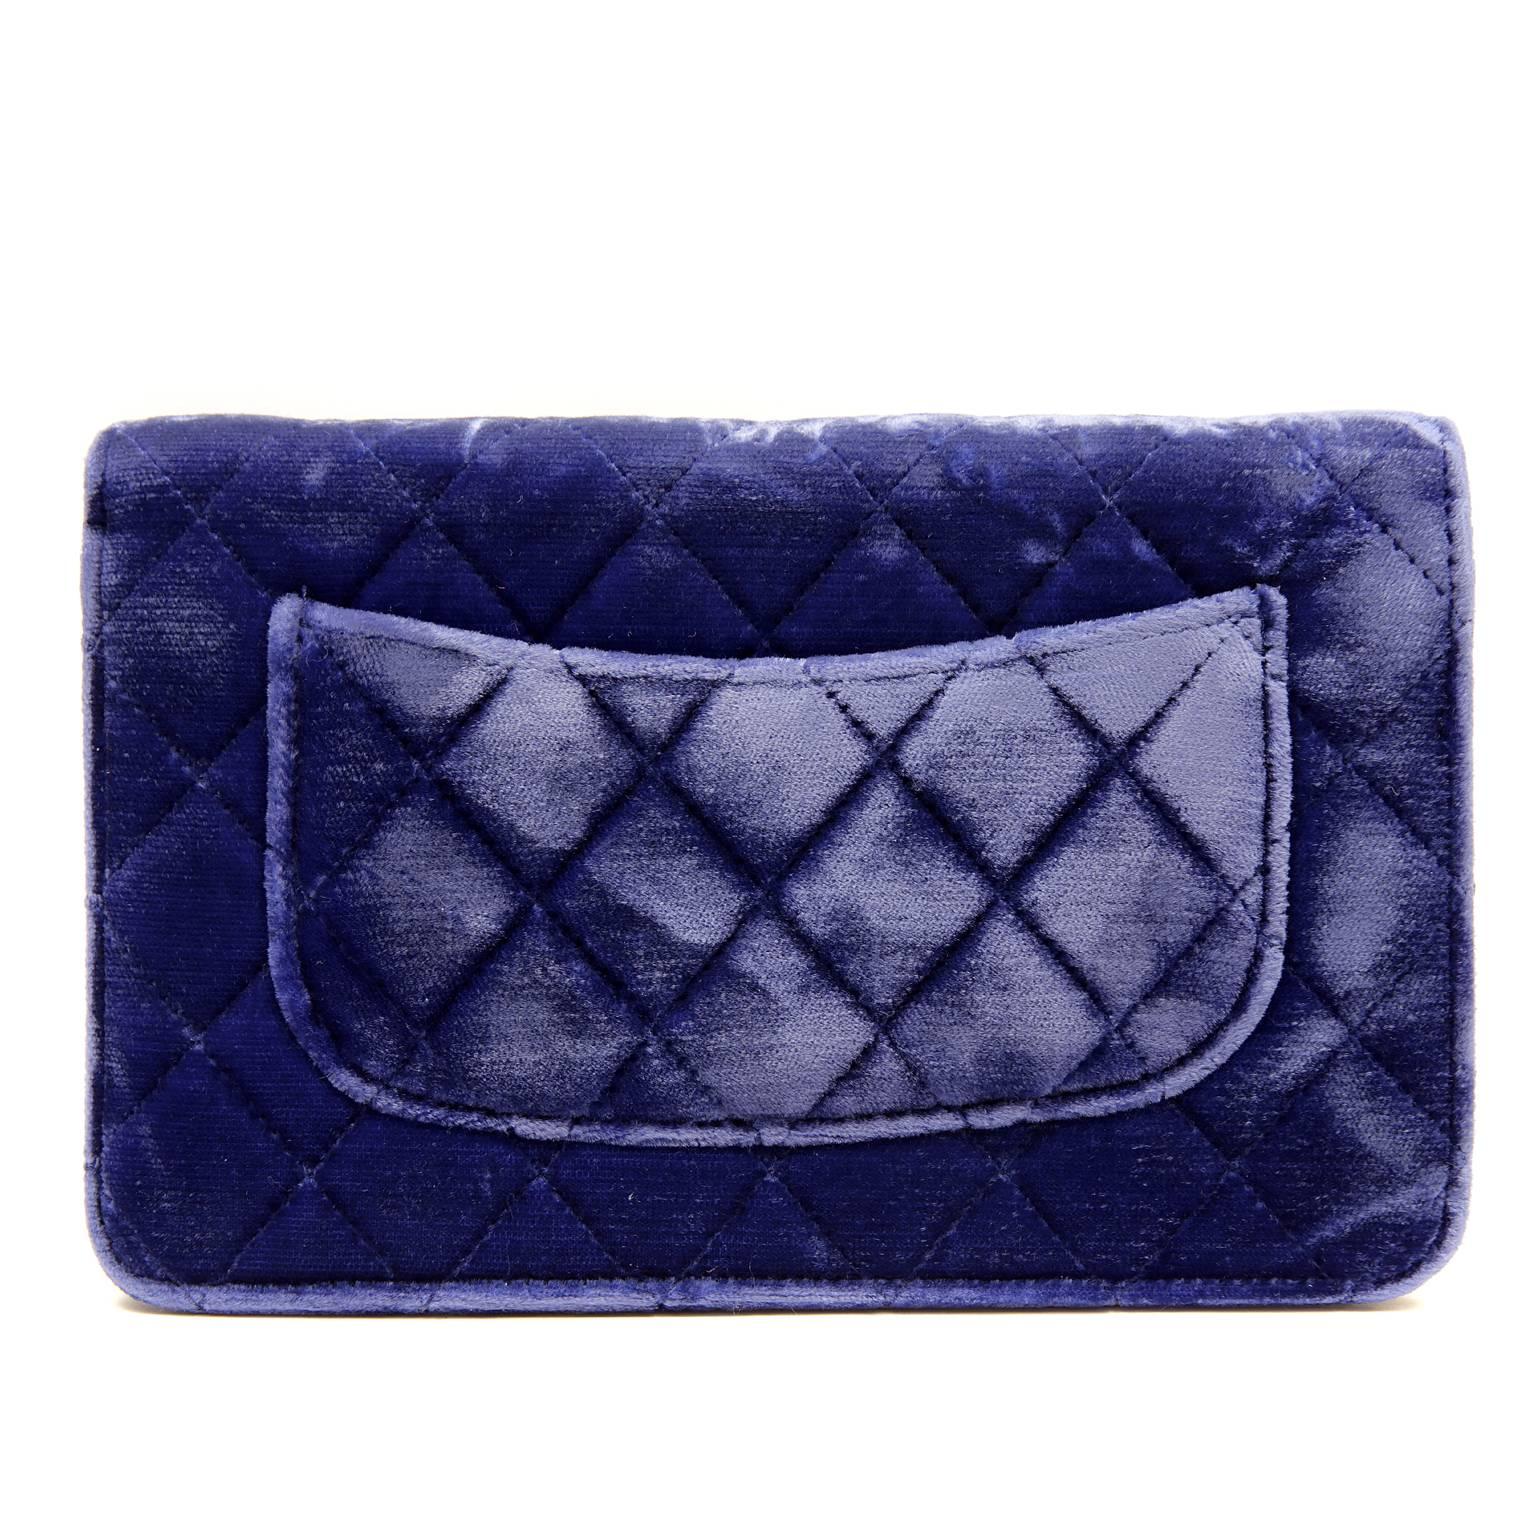 Chanel Blue Velvet WOC PRISTINE, Never Carried
 The ideal companion for hands free daytime or evening use, this functional Chanel exudes style while keeping everything perfectly organized.
 
Electric blue velvet is quilted in signature Chanel